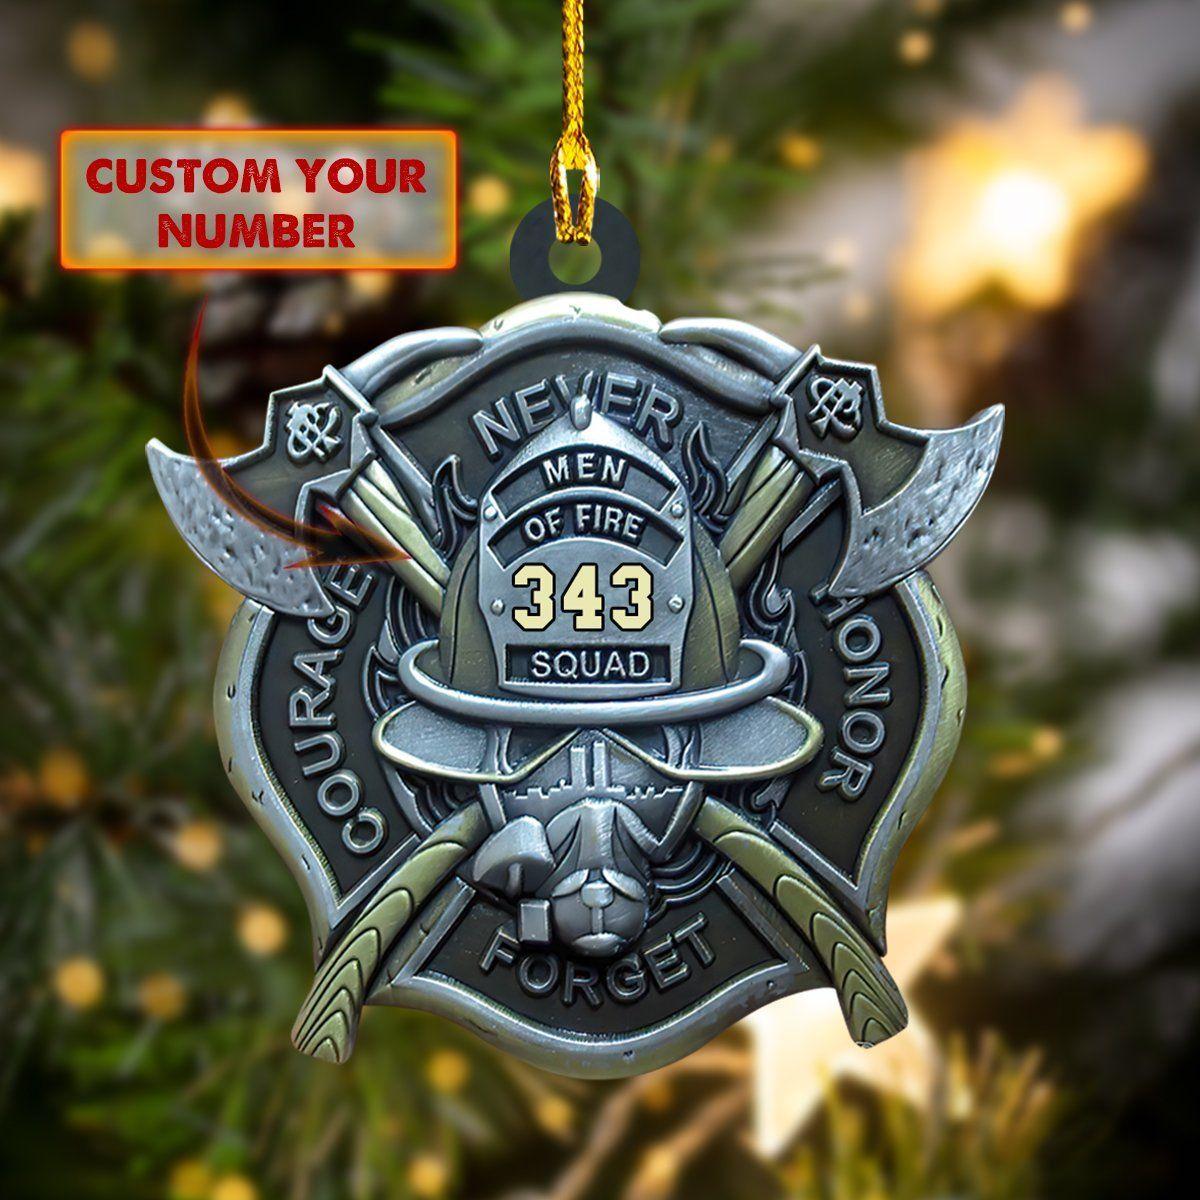 giftngon - Personalized Firefighter Christmas Ornament | Custom Shaped Ornament | Custom Number New V3